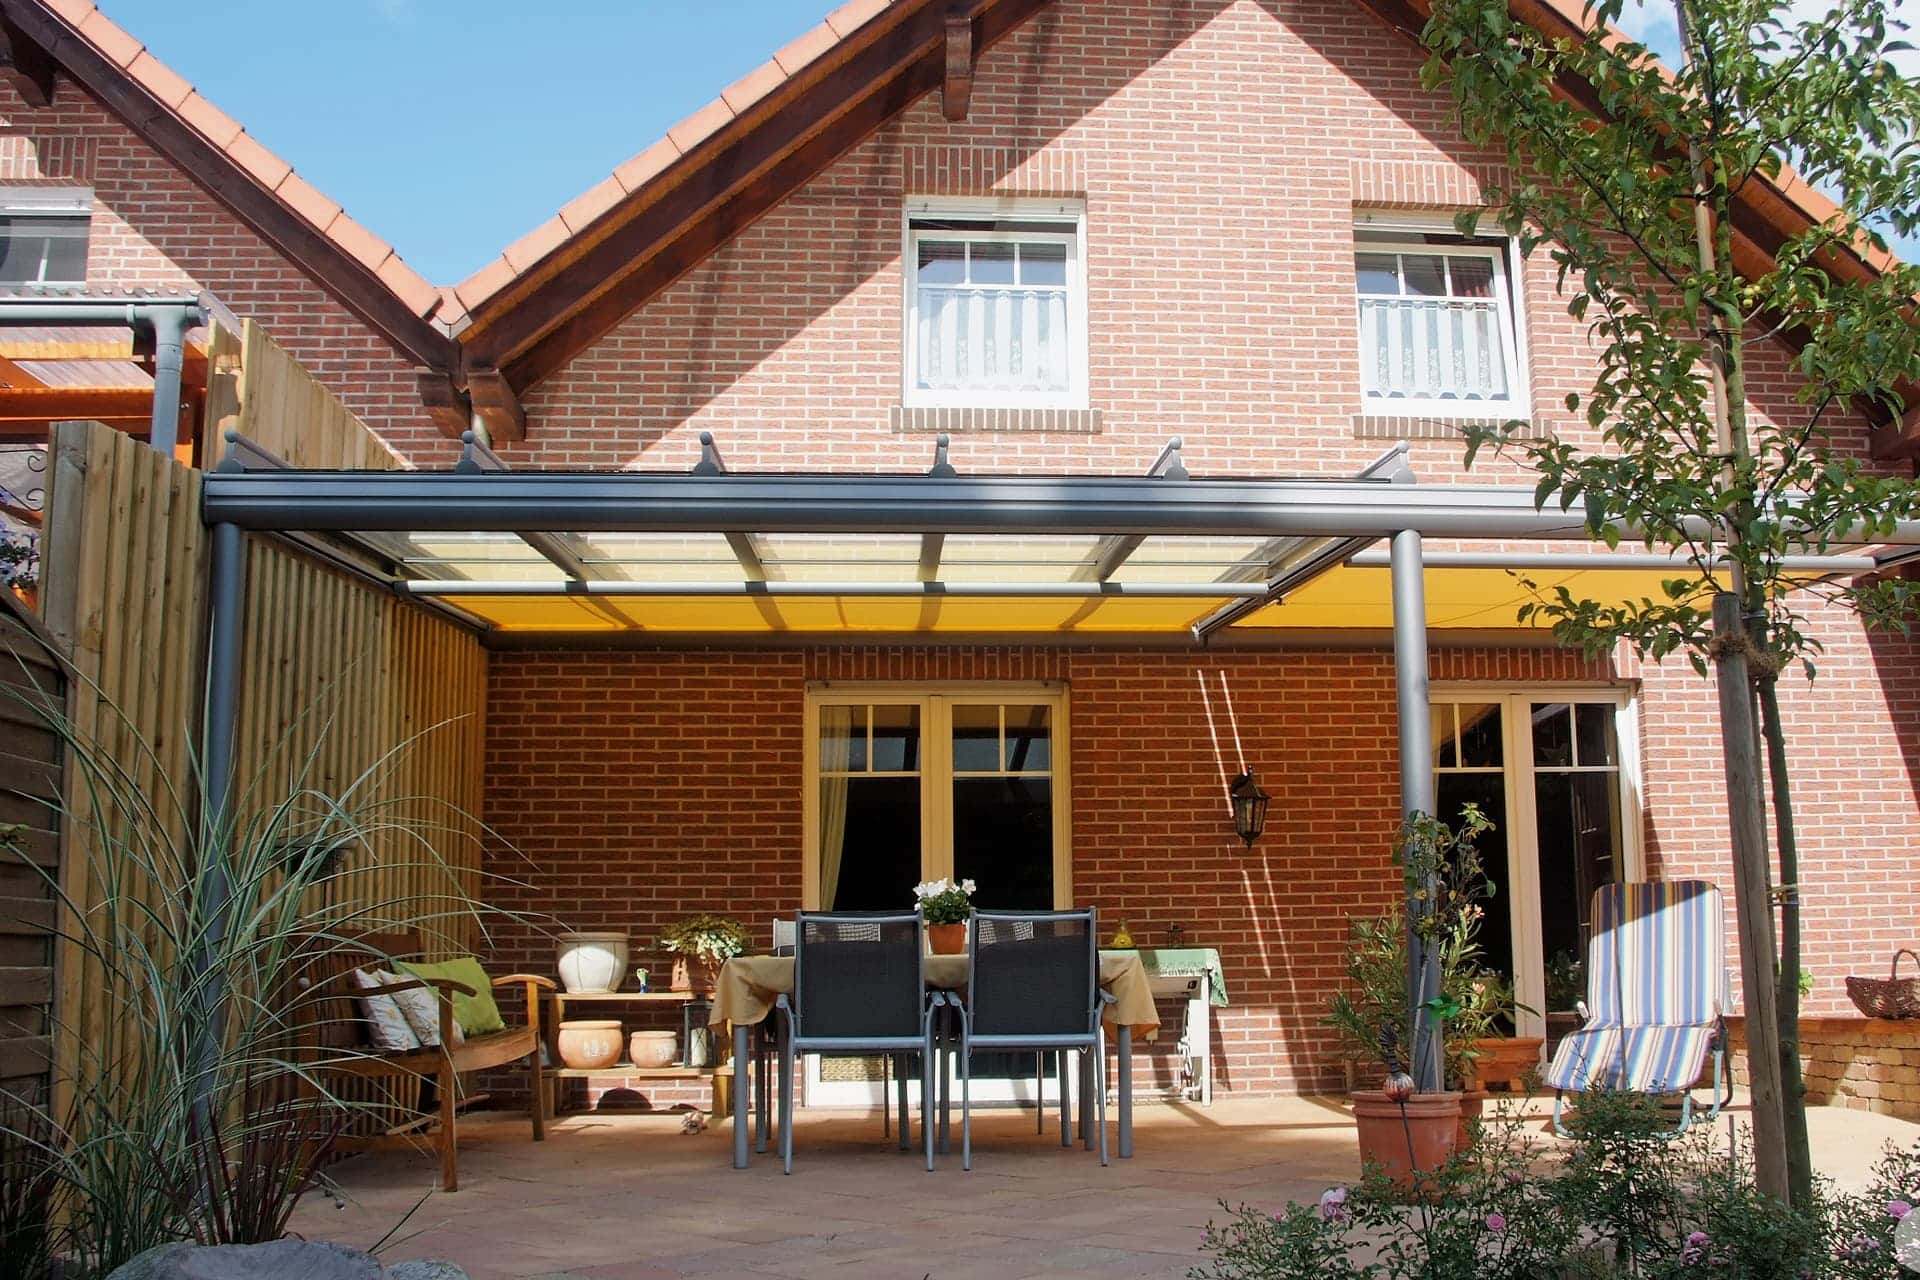 Future Proof Your Home: The Long Term Benefits of Investing in a Weinor Glass Veranda or Patio Roof